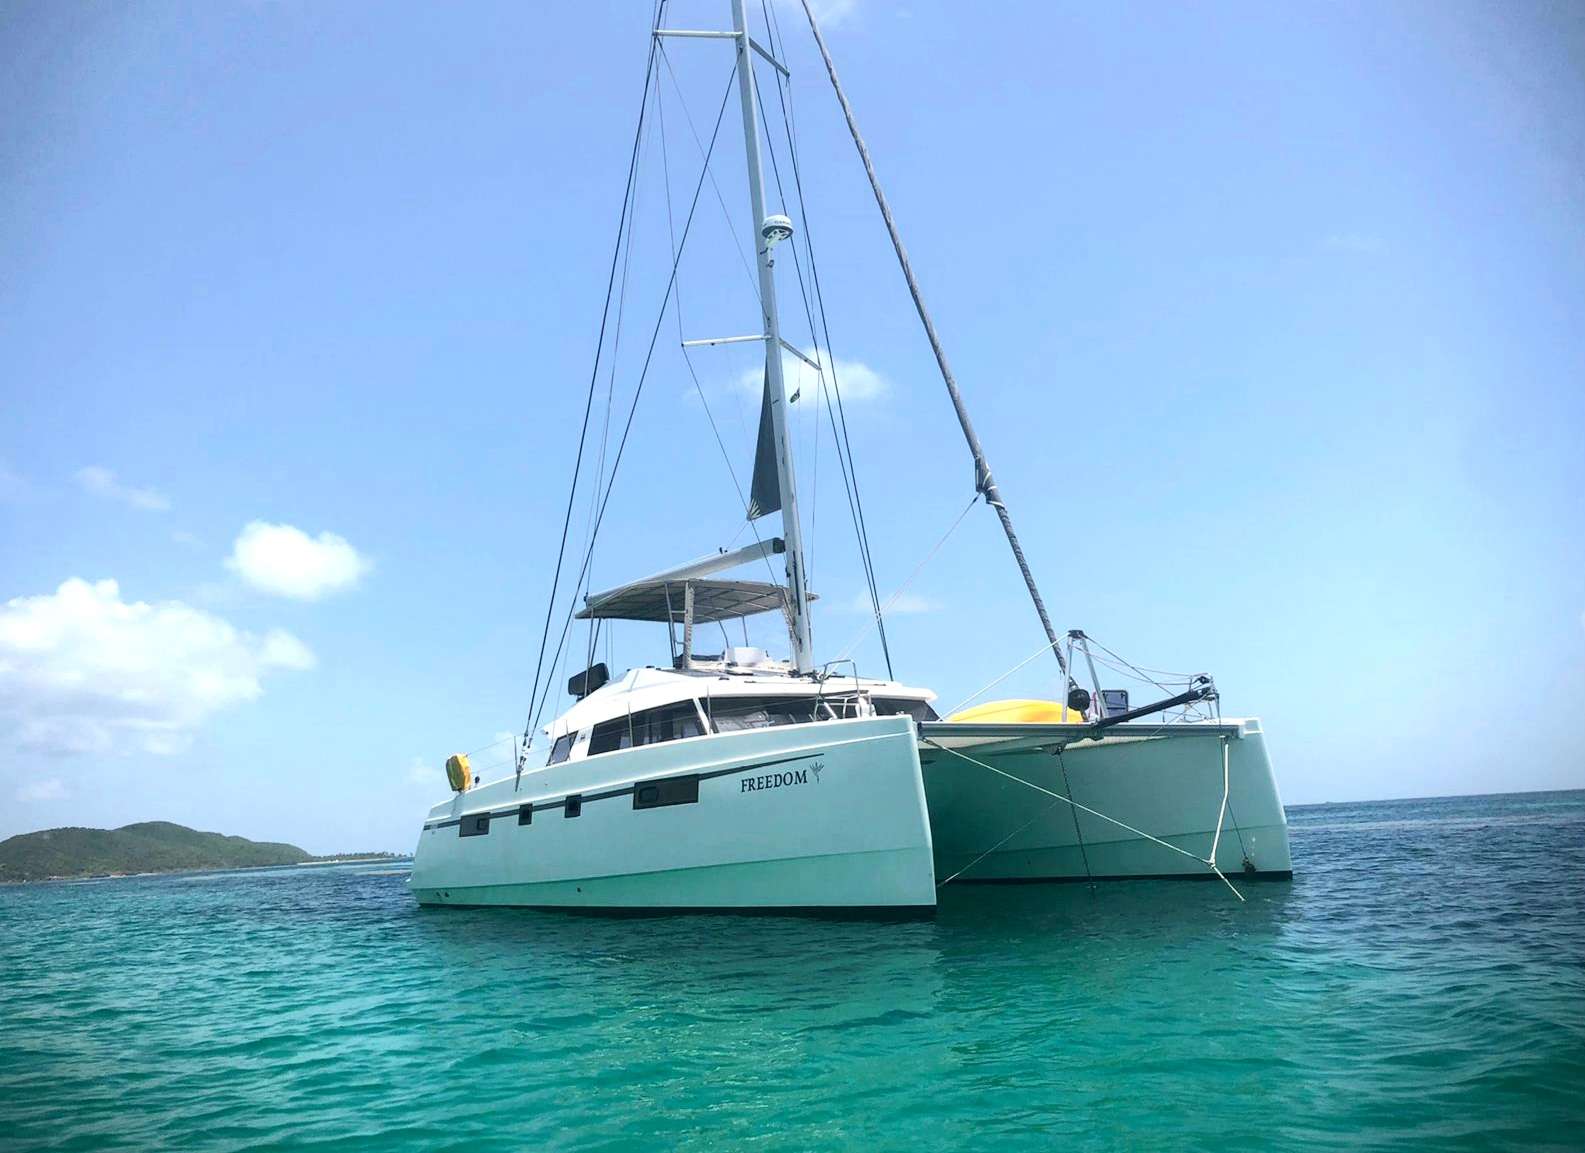 Freedom - Yacht Charter East End Bay & Boat hire in Caribbean 1